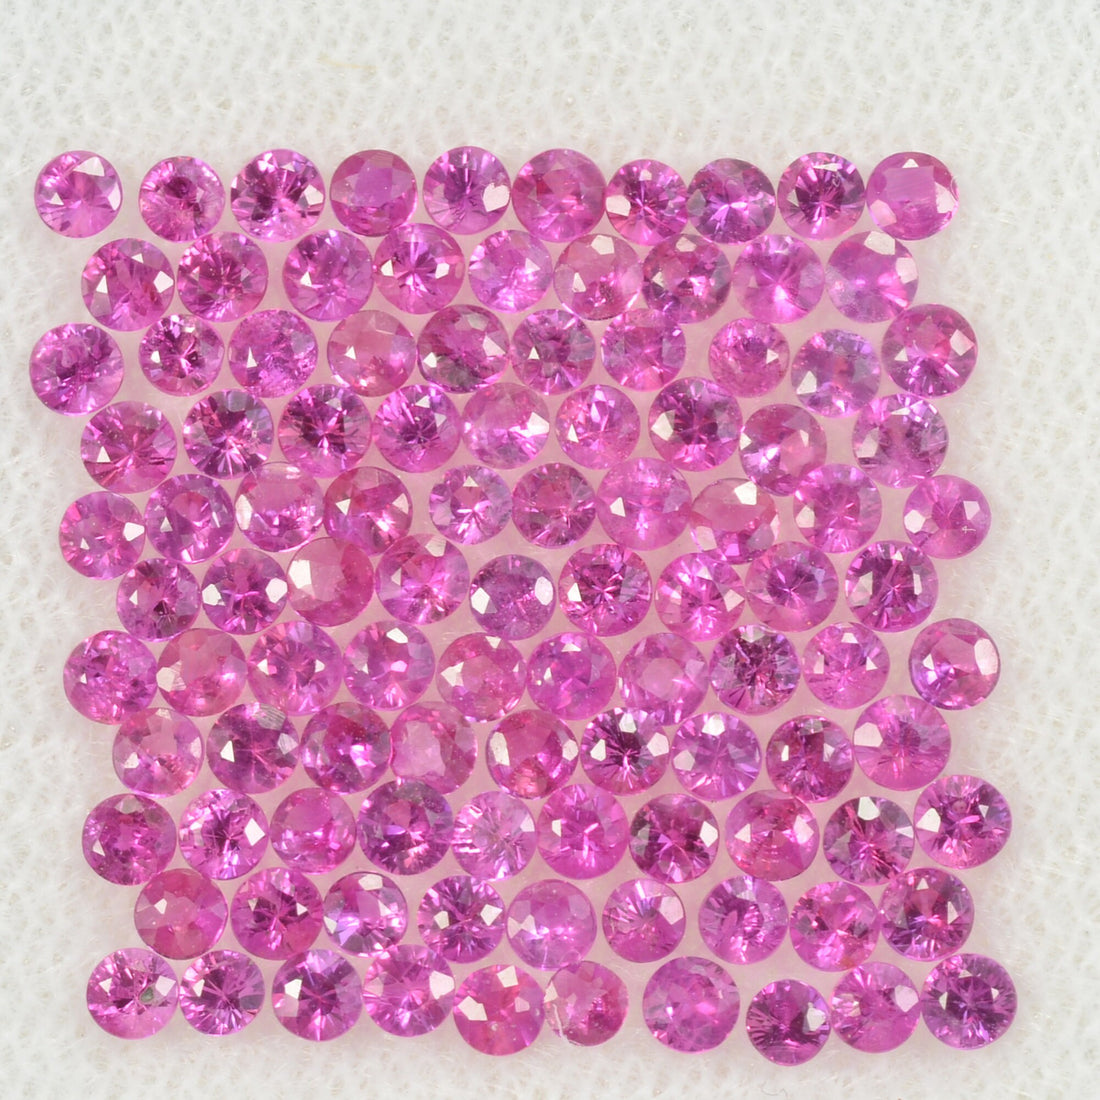 2.0 mm Natural Pink Sapphire Loose Gemstone Round Diamond Cut Vs Quality AA Color